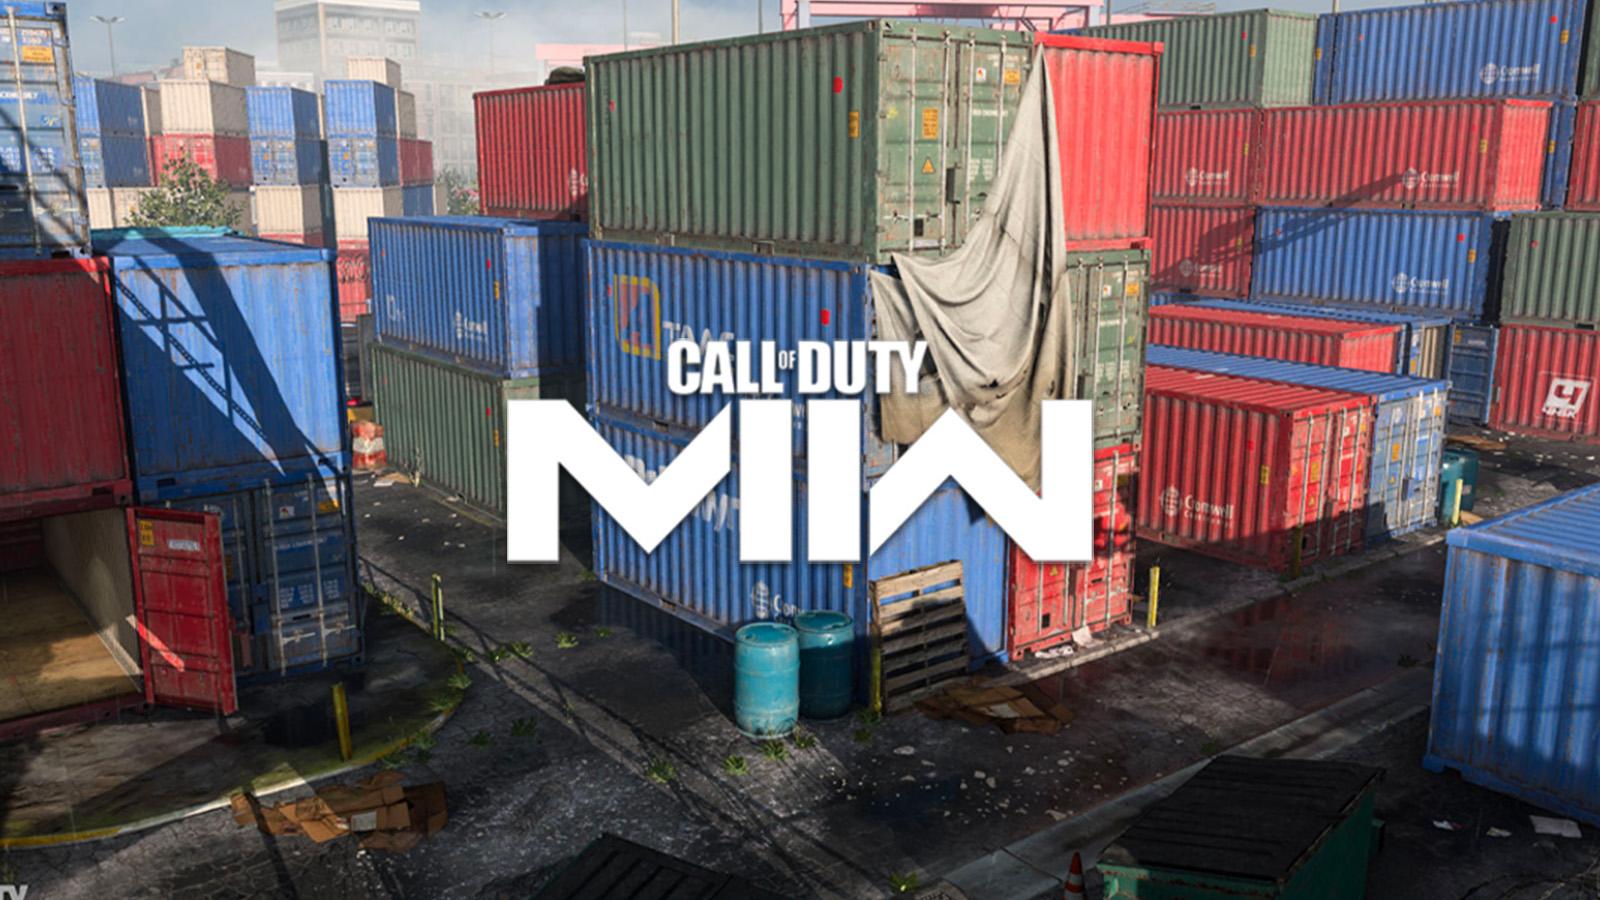 Shipment from MW2019 with MWII logo